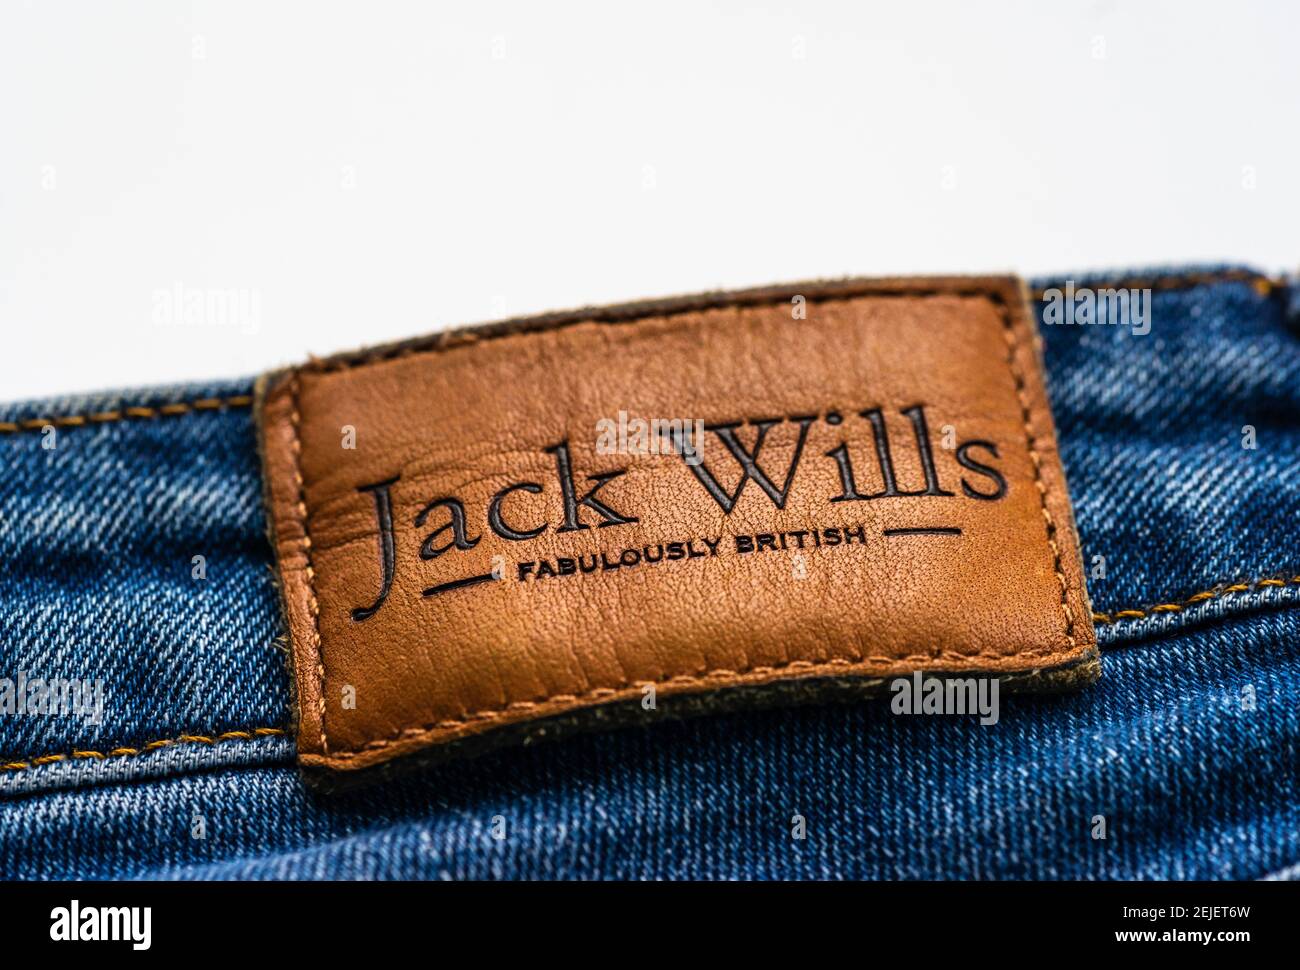 Jack Wills label on a blue denim jeans, Jack Wills is a British high street fashion clothing label Stock Photo